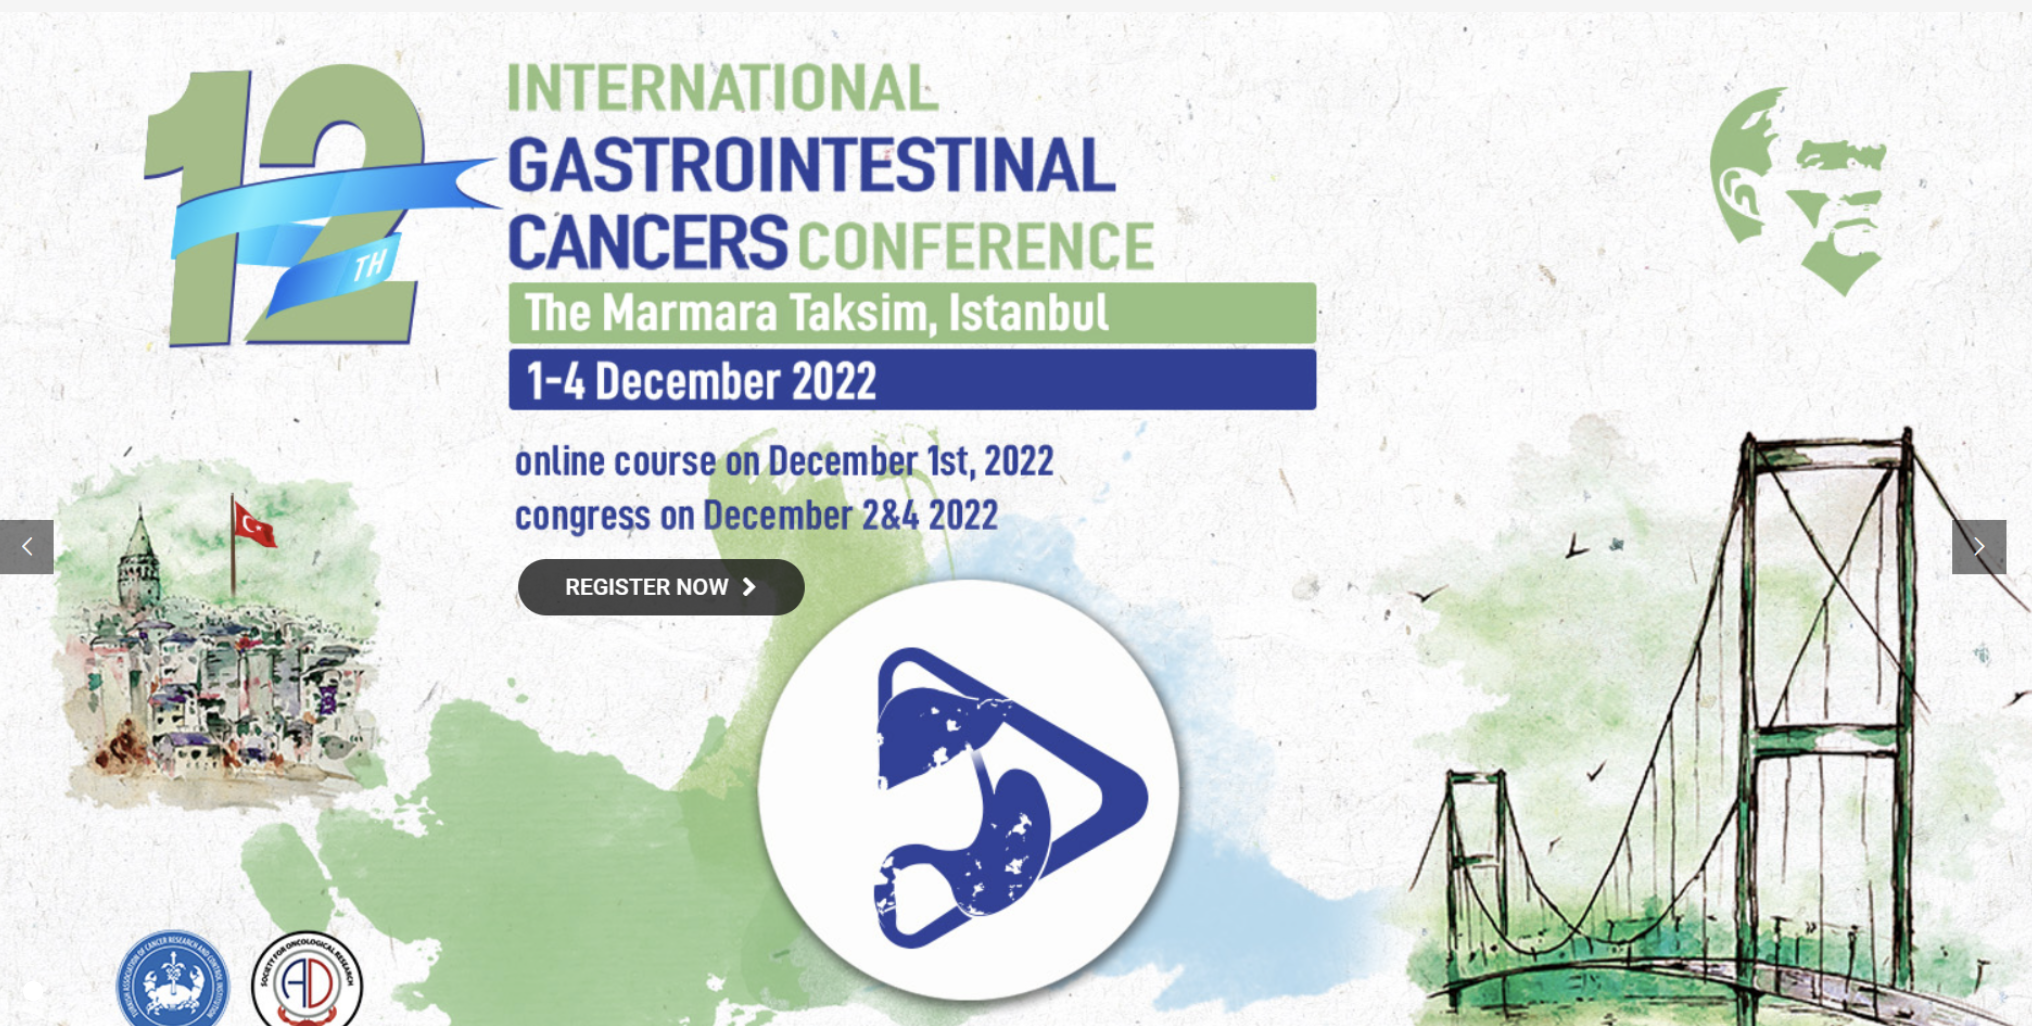 International Gastrointestinal Cancers Conference